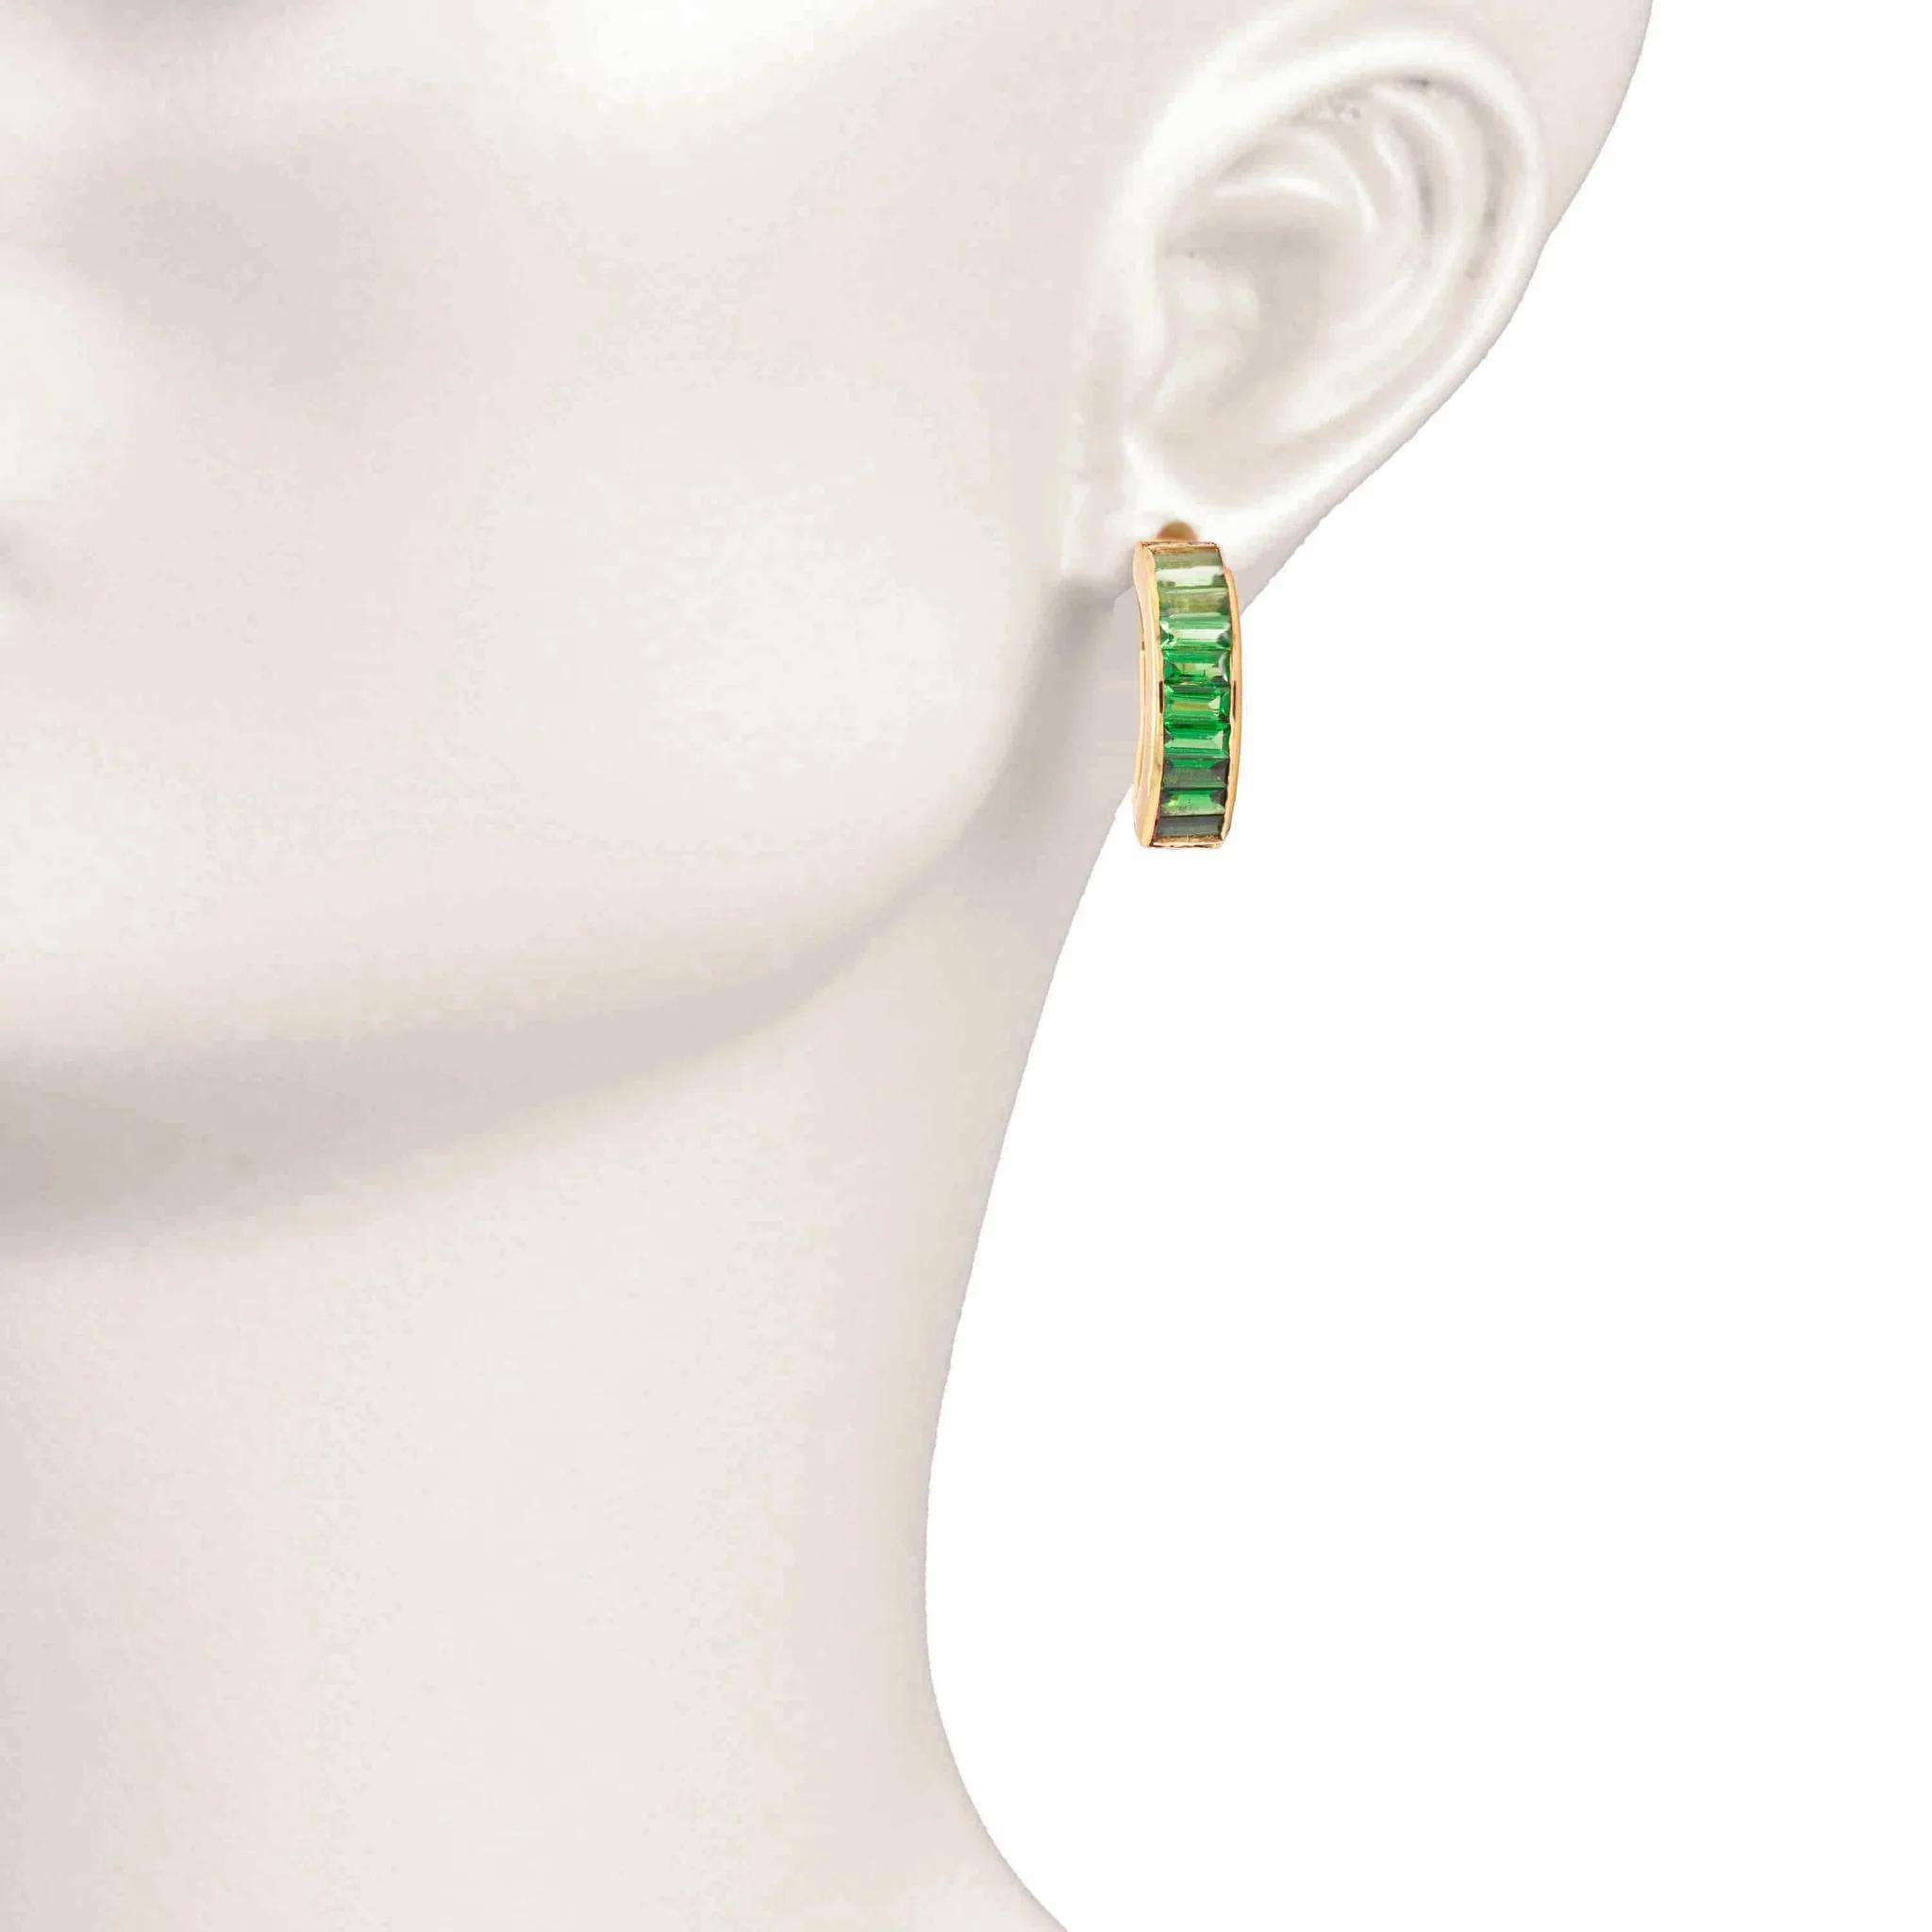 Elevate elegance with the Green Tsavorite Bar Earrings, blending natural allure and contemporary sophistication. These earrings feature a sleek bar design adorned with vibrant green tsavorite gemstones, capturing lush landscapes' essence.

The